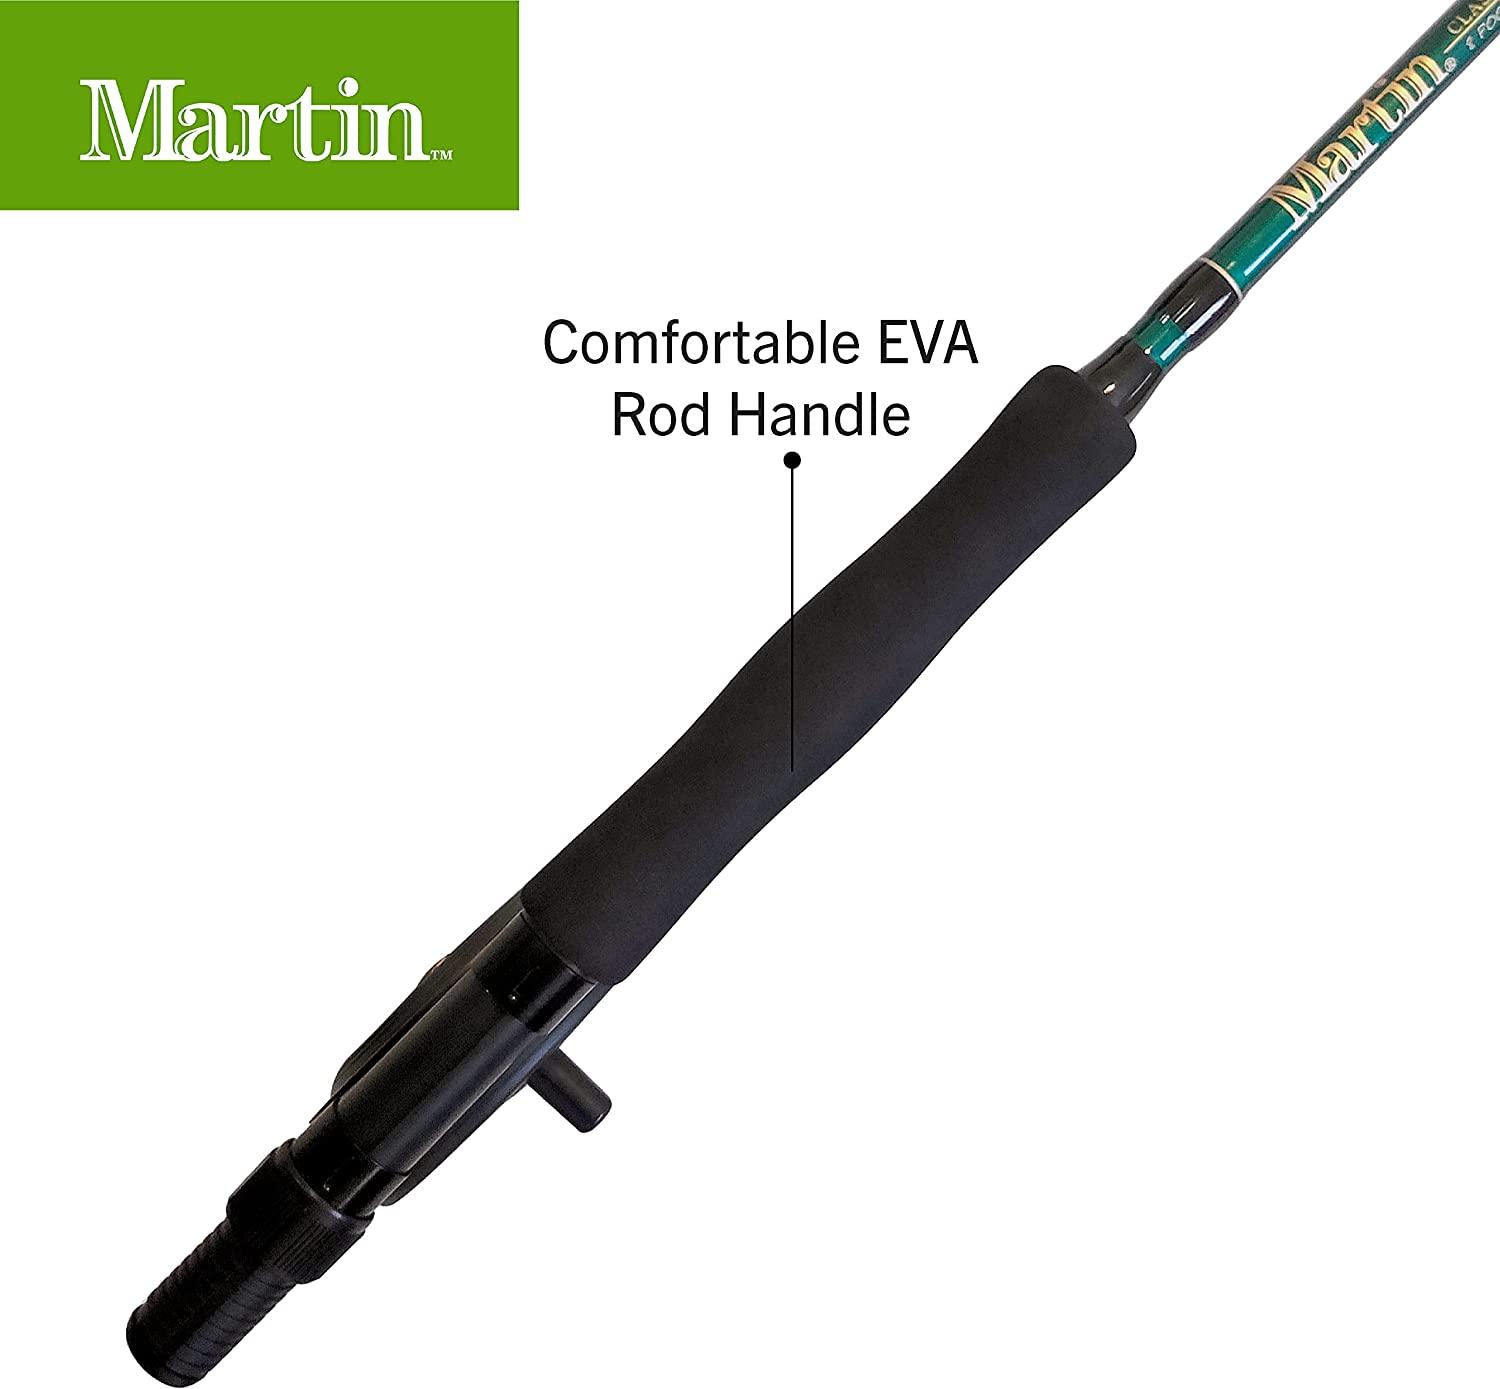 Martin Complete Fly Fishing Kit, 8-Foot 5/6-Weight 3-Piece Fly Fishing Pole,  Size 5/6 Rim-Control Reel, Pre-spooled with Backing, Line and Leader,  Includes Custom Fly Tackle Assortment, Brown/Green